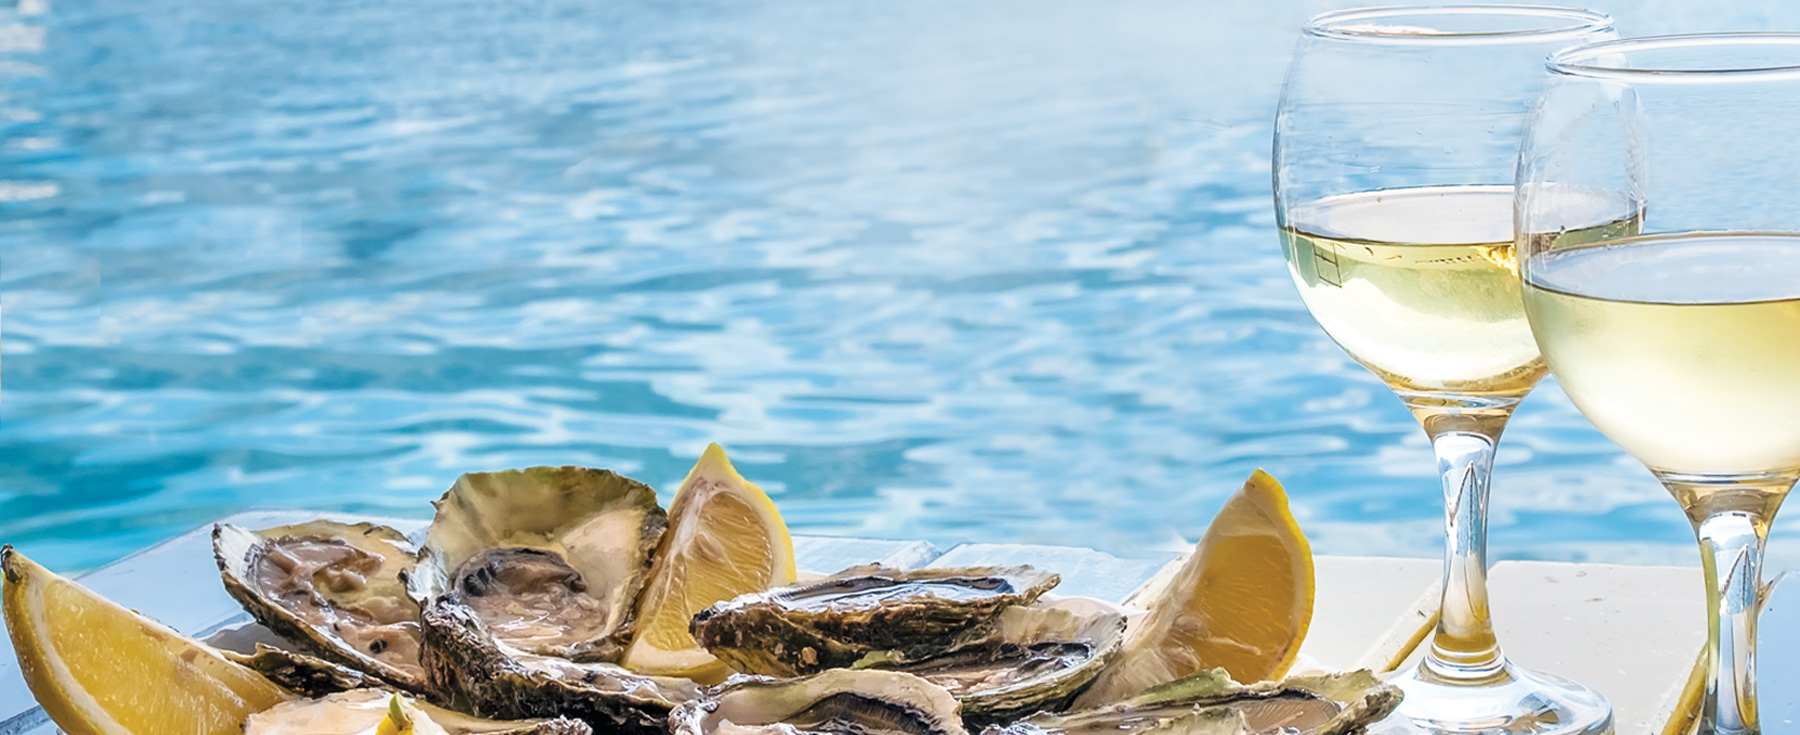 Taste of the Tides – A Celebration of Oysters